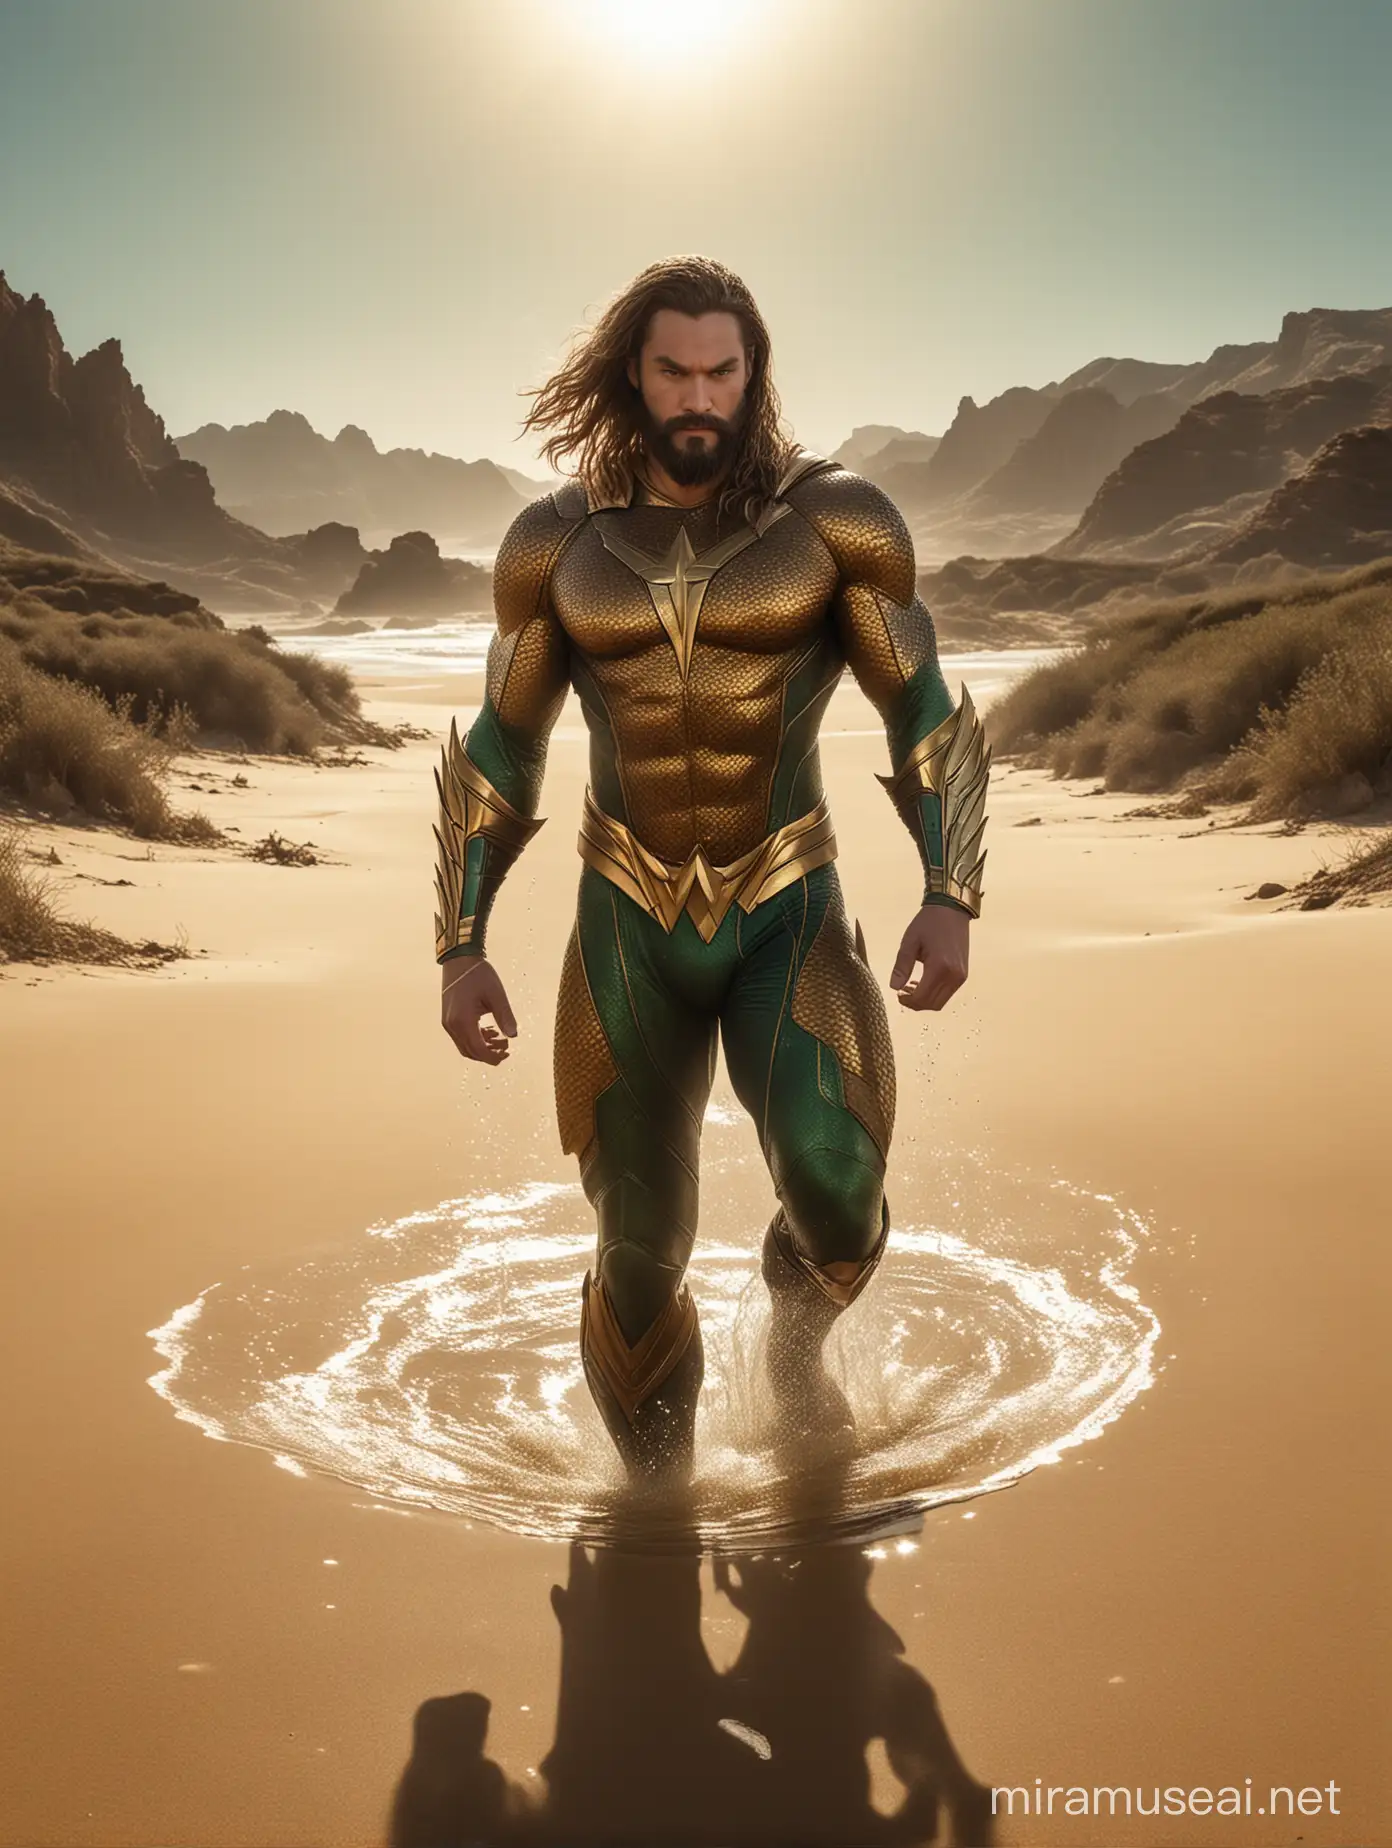 
In an unlikely setting, far from the depths of the ocean, Aquaman finds himself amidst the unforgiving expanse of the desert. The scorching sun beats down relentlessly, casting waves of heat across the arid landscape. Yet, despite the harsh surroundings, Aquaman stands tall, his determination unyielding.

Surrounded by endless dunes of sand, Aquaman's presence seems almost surreal. His Atlantean armor glistens in the sunlight, a stark contrast to the barren landscape. With each step, he feels the weight of the desert pressing down upon him, a reminder of the challenges he must overcome.

Though far from the sea, Aquaman remains connected to the elements. He can sense the subtle shifts in the desert's ecosystem, feeling the pulse of life beneath the scorching sands. It is a different kind of environment, but one that he approaches with the same reverence and respect as he does the ocean depths.

As he journeys through the desert, Aquaman encounters a lone oasis, a shimmering pool of water amidst the sea of sand. It is a welcome sight, offering respite from the relentless heat. With gratitude in his heart, Aquaman approaches the oasis, knowing that even in the most unexpected places, nature provides.

But his moment of reprieve is short-lived, for danger lurks beneath the tranquil surface. As Aquaman dives into the cool waters, he is confronted by a fierce guardian, a creature of the desert depths intent on protecting its oasis. Undeterred, Aquaman faces the challenge head-on, his Atlantean strength and resilience proving to be formidable allies.

In the end, Aquaman emerges victorious, his bond with the natural world strengthened by the encounter. As he continues his journey through the desert, he carries with him the memory of the oasis, a testament to the interconnectedness of all living things, even in the most unlikely of places.